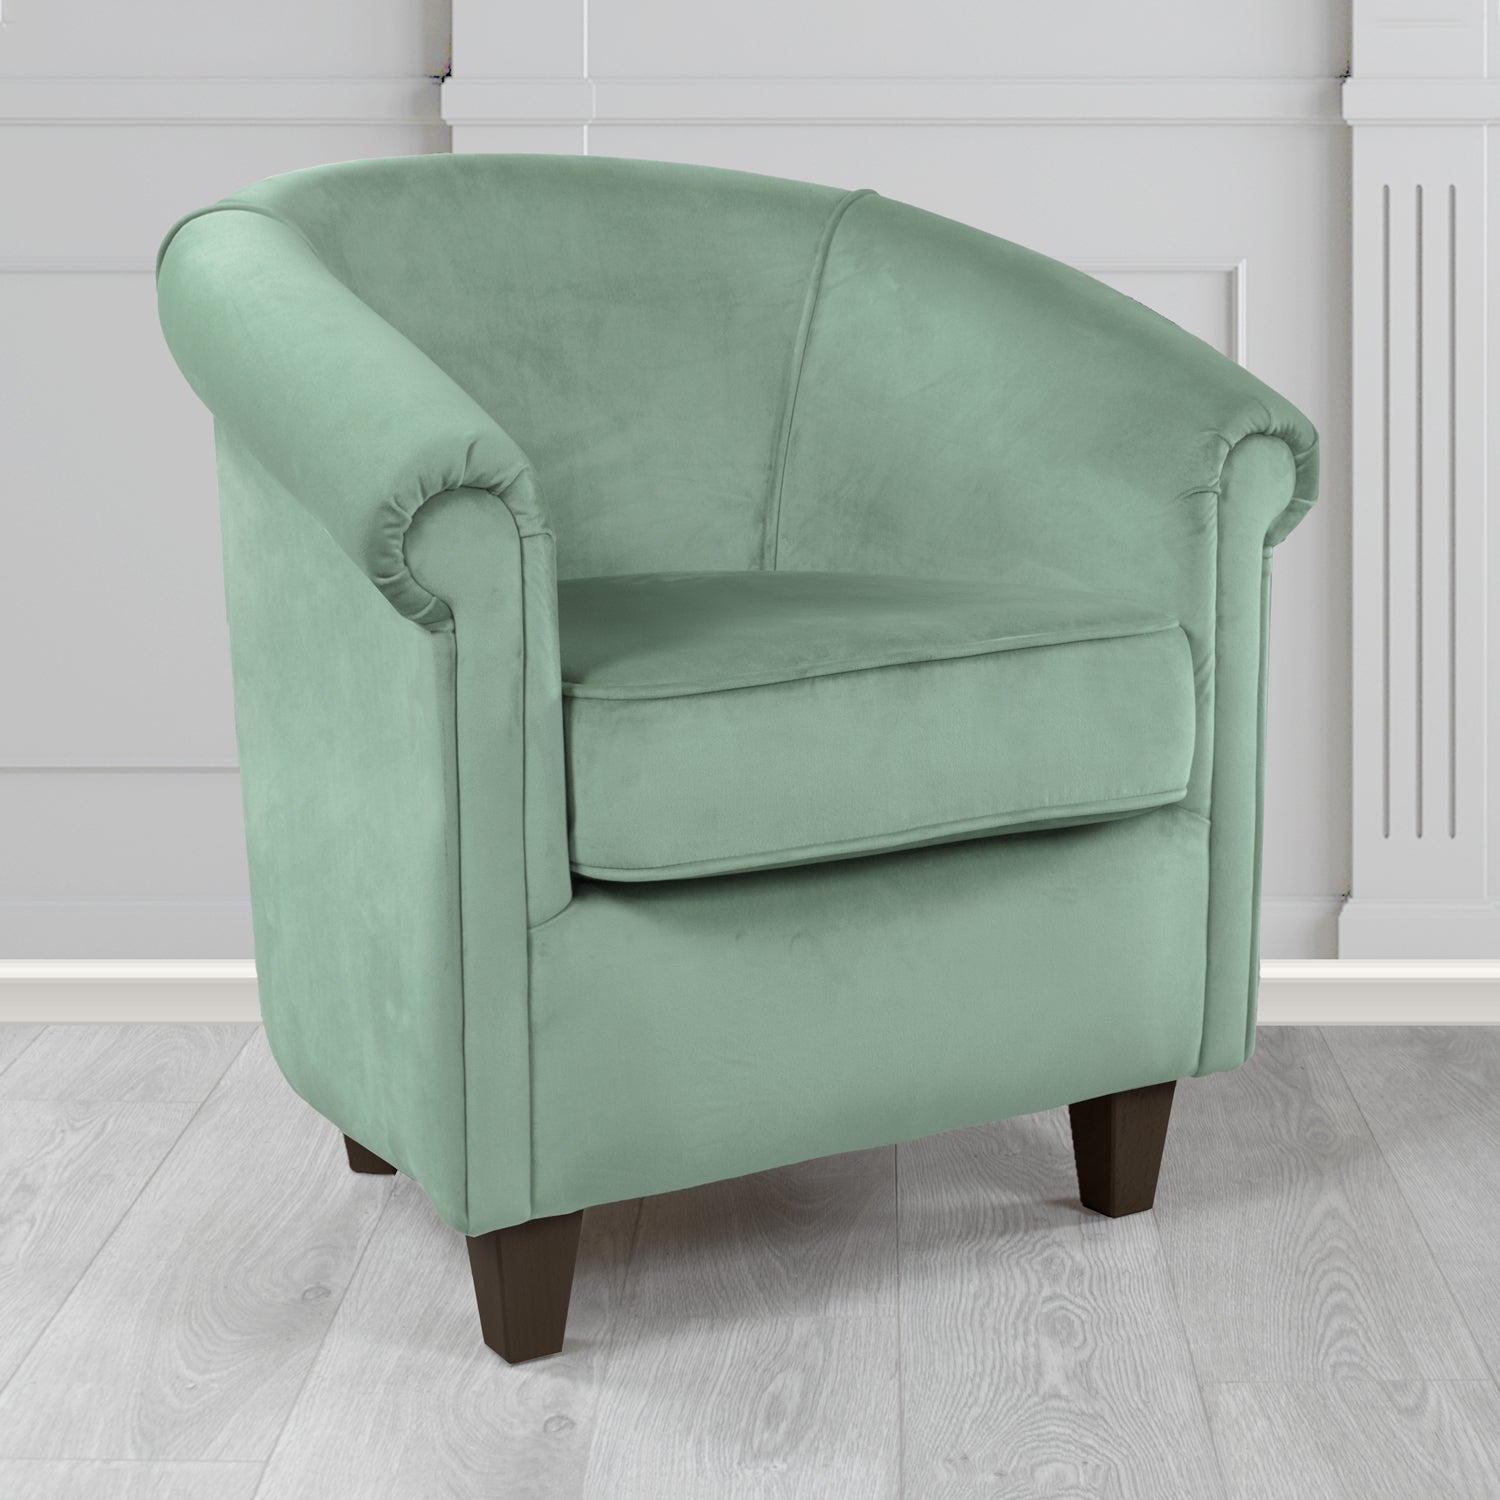 Siena Passione Airforce PAS2718 Velvet Fabric Tub Chair (4679834796074)